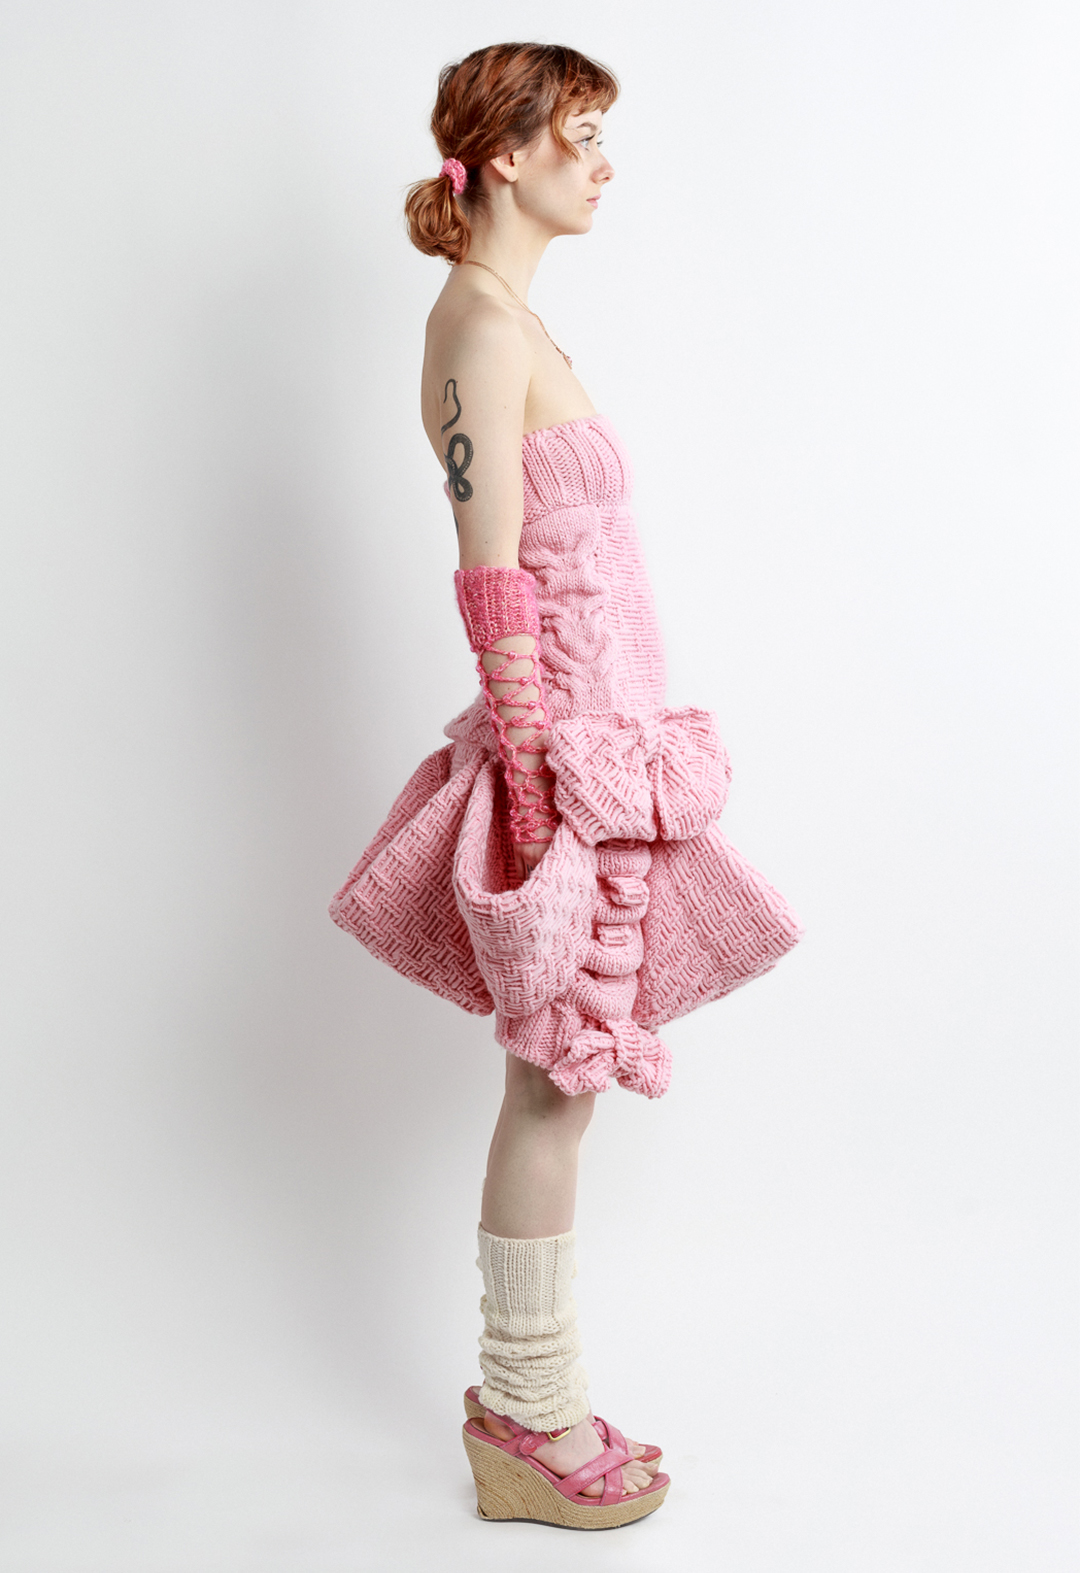 Photo of a girl posing in a pink sleeveless magical girl mini dress, looking to the side. The dress is hand knit with baby pink wool. The dress features big bows and big pockets circling the skirt of the dress. The dress, and girl, are posed at a side view to the camera. The girl is wearing crochet fishnet gloves, heels, leg warmers, pigtails, and a heart necklace. The girl has her hands to the side, in two of the big pockets of the dress. 